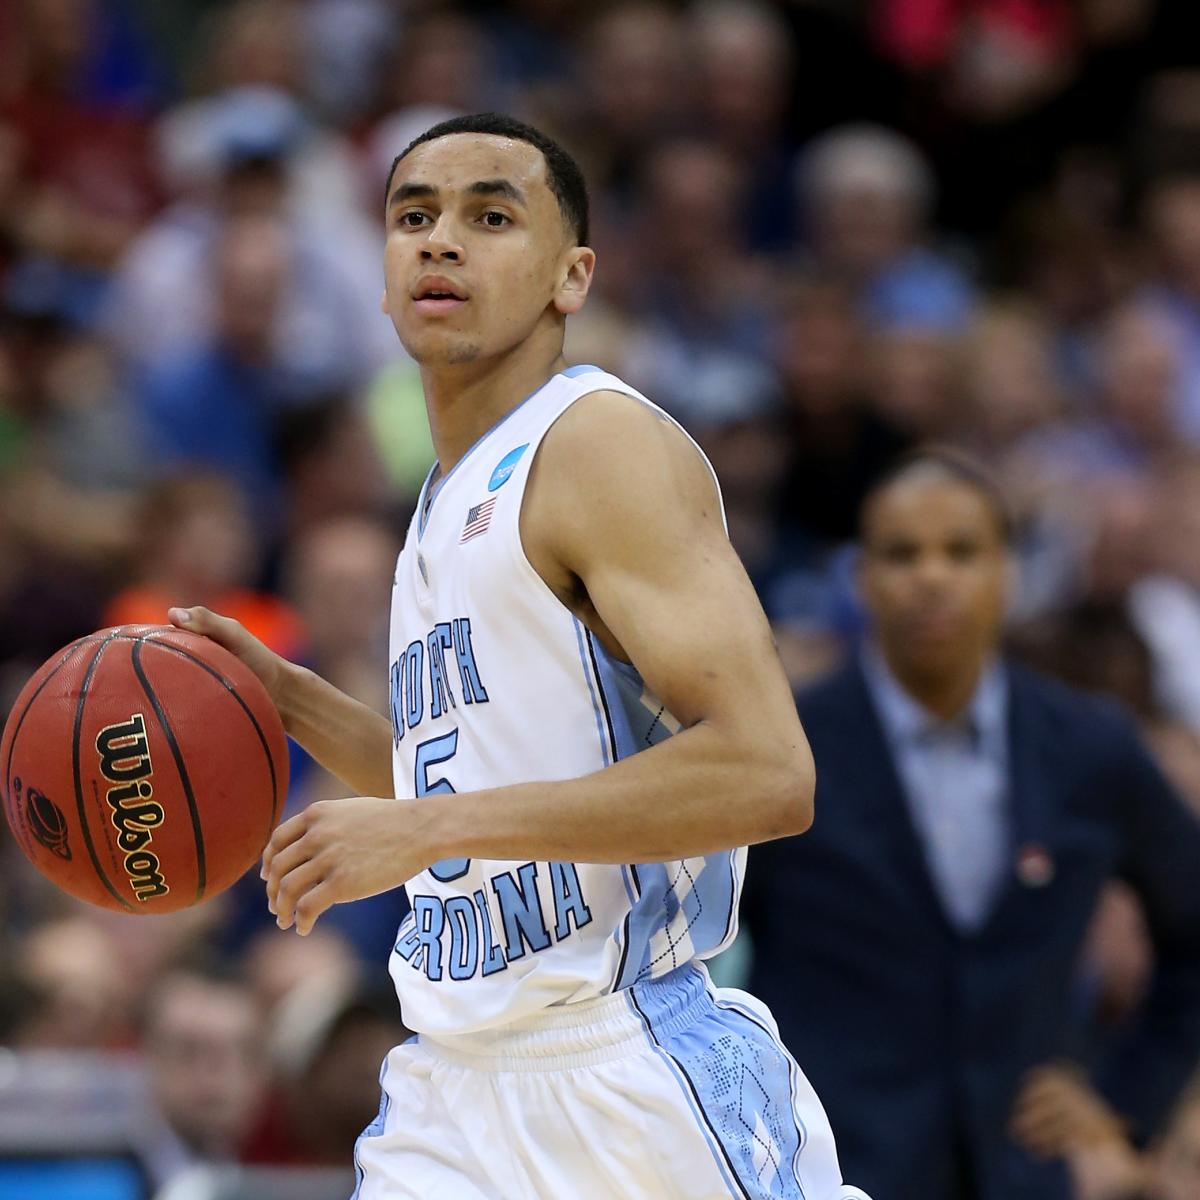 Arkansas vs. UNC Live Score, Highlights and Reaction for Round of 32 Bleacher Report Latest